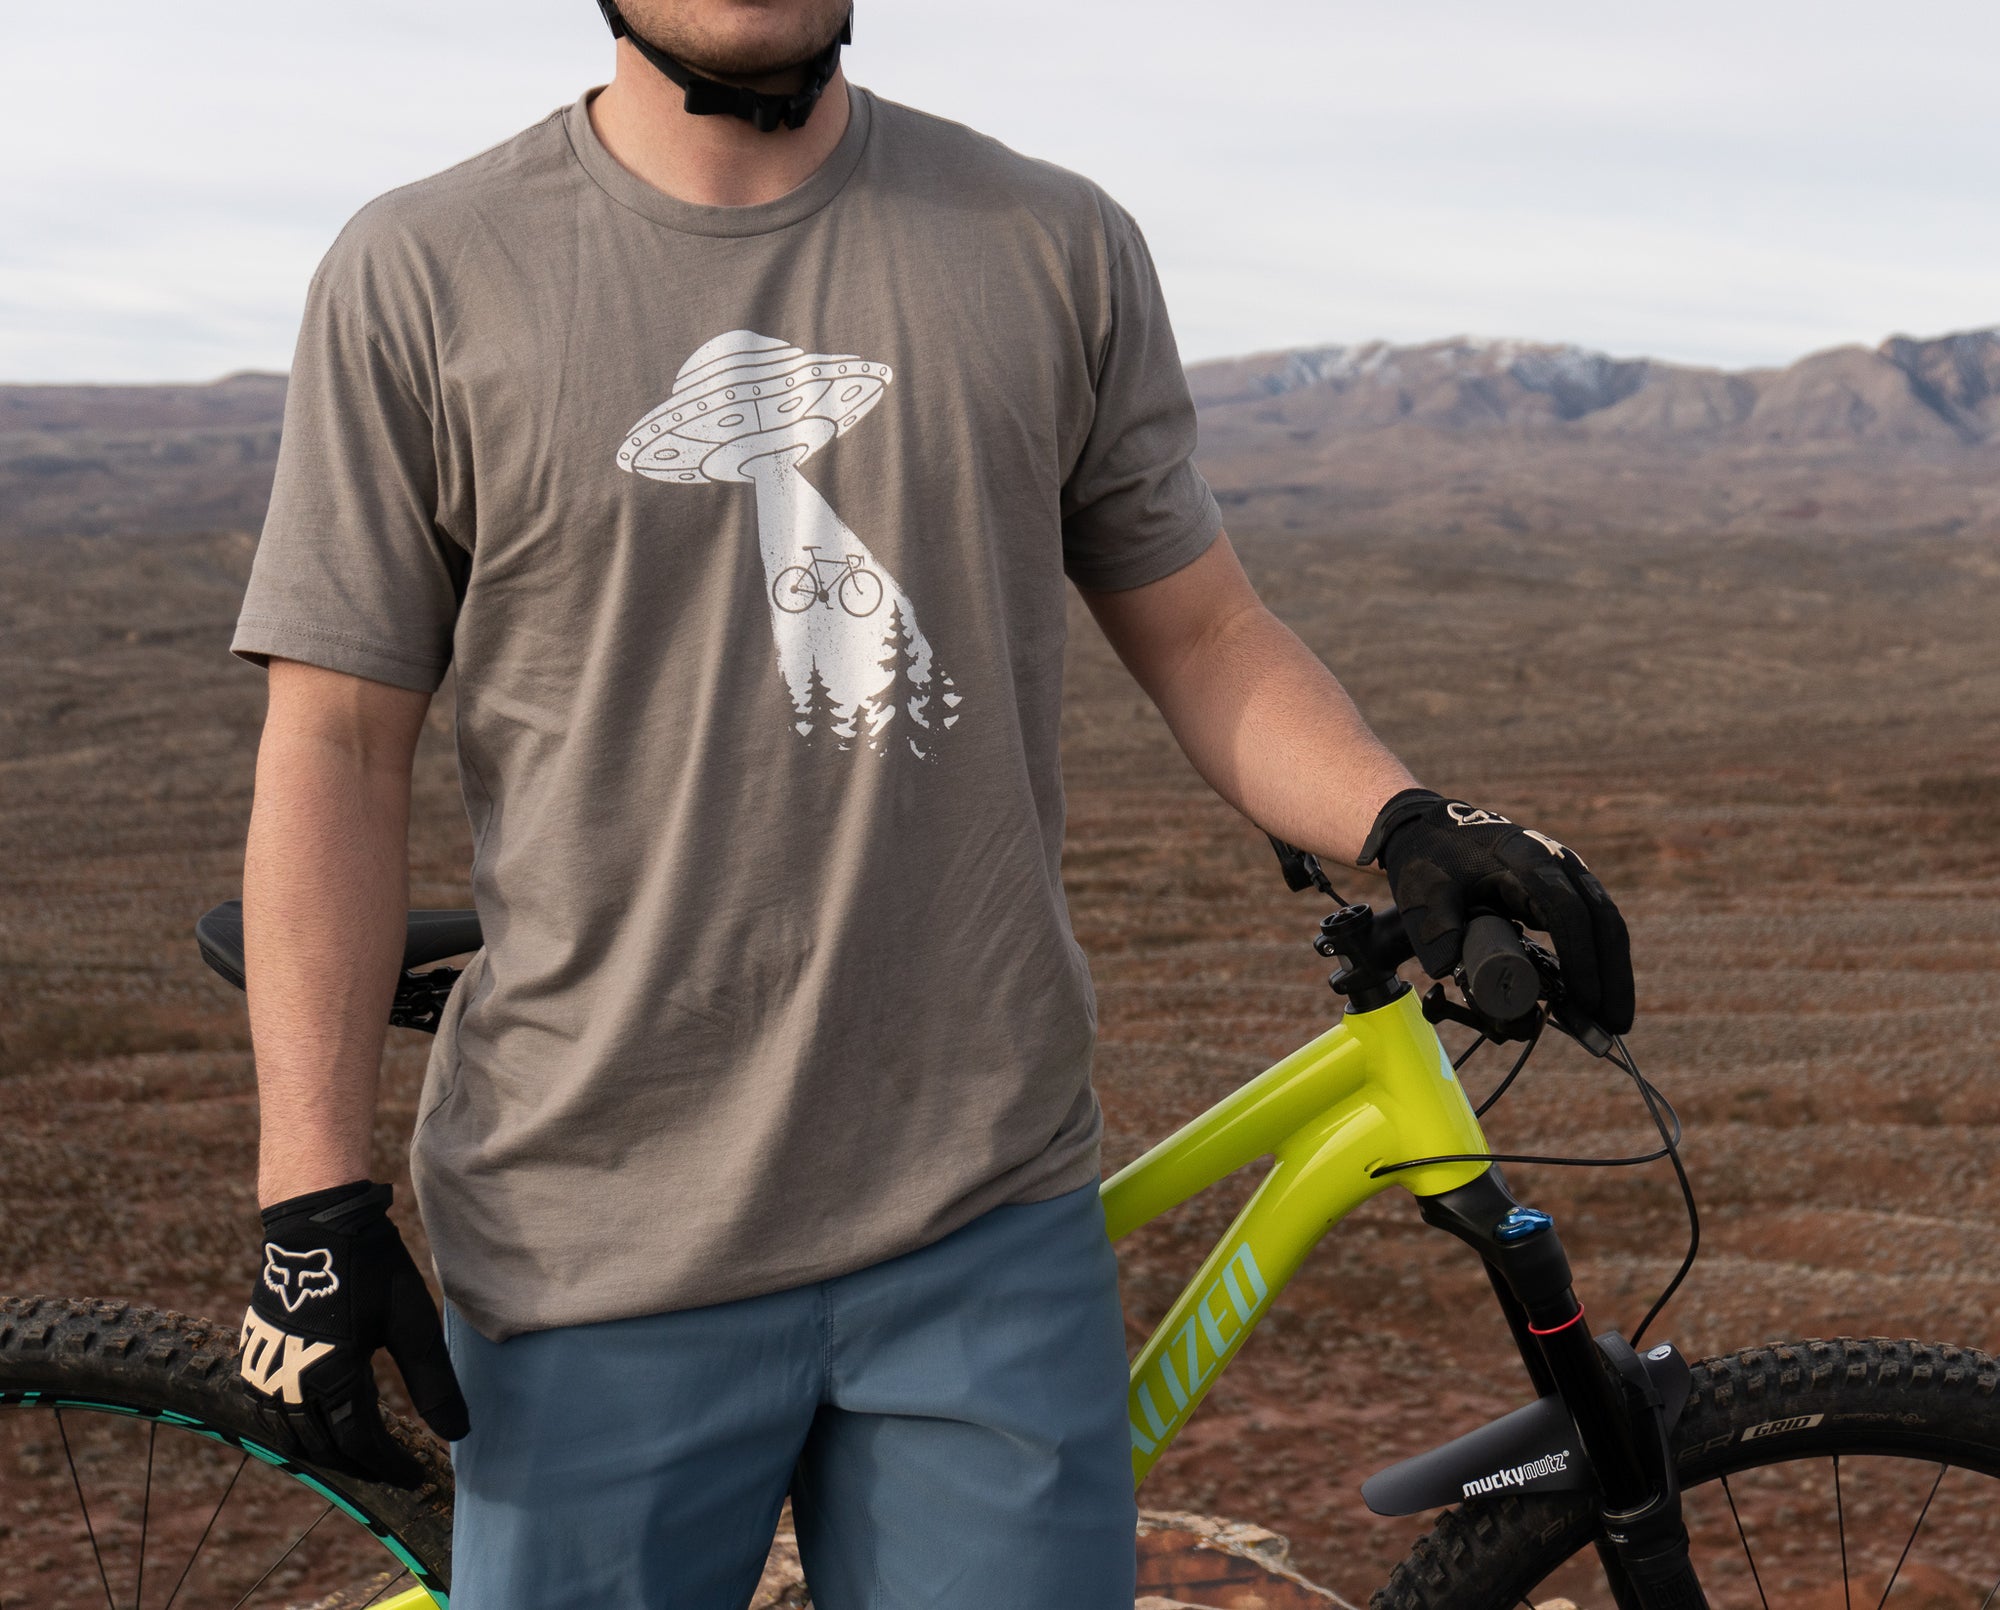 Top 10 Cycling T-shirts of 2019